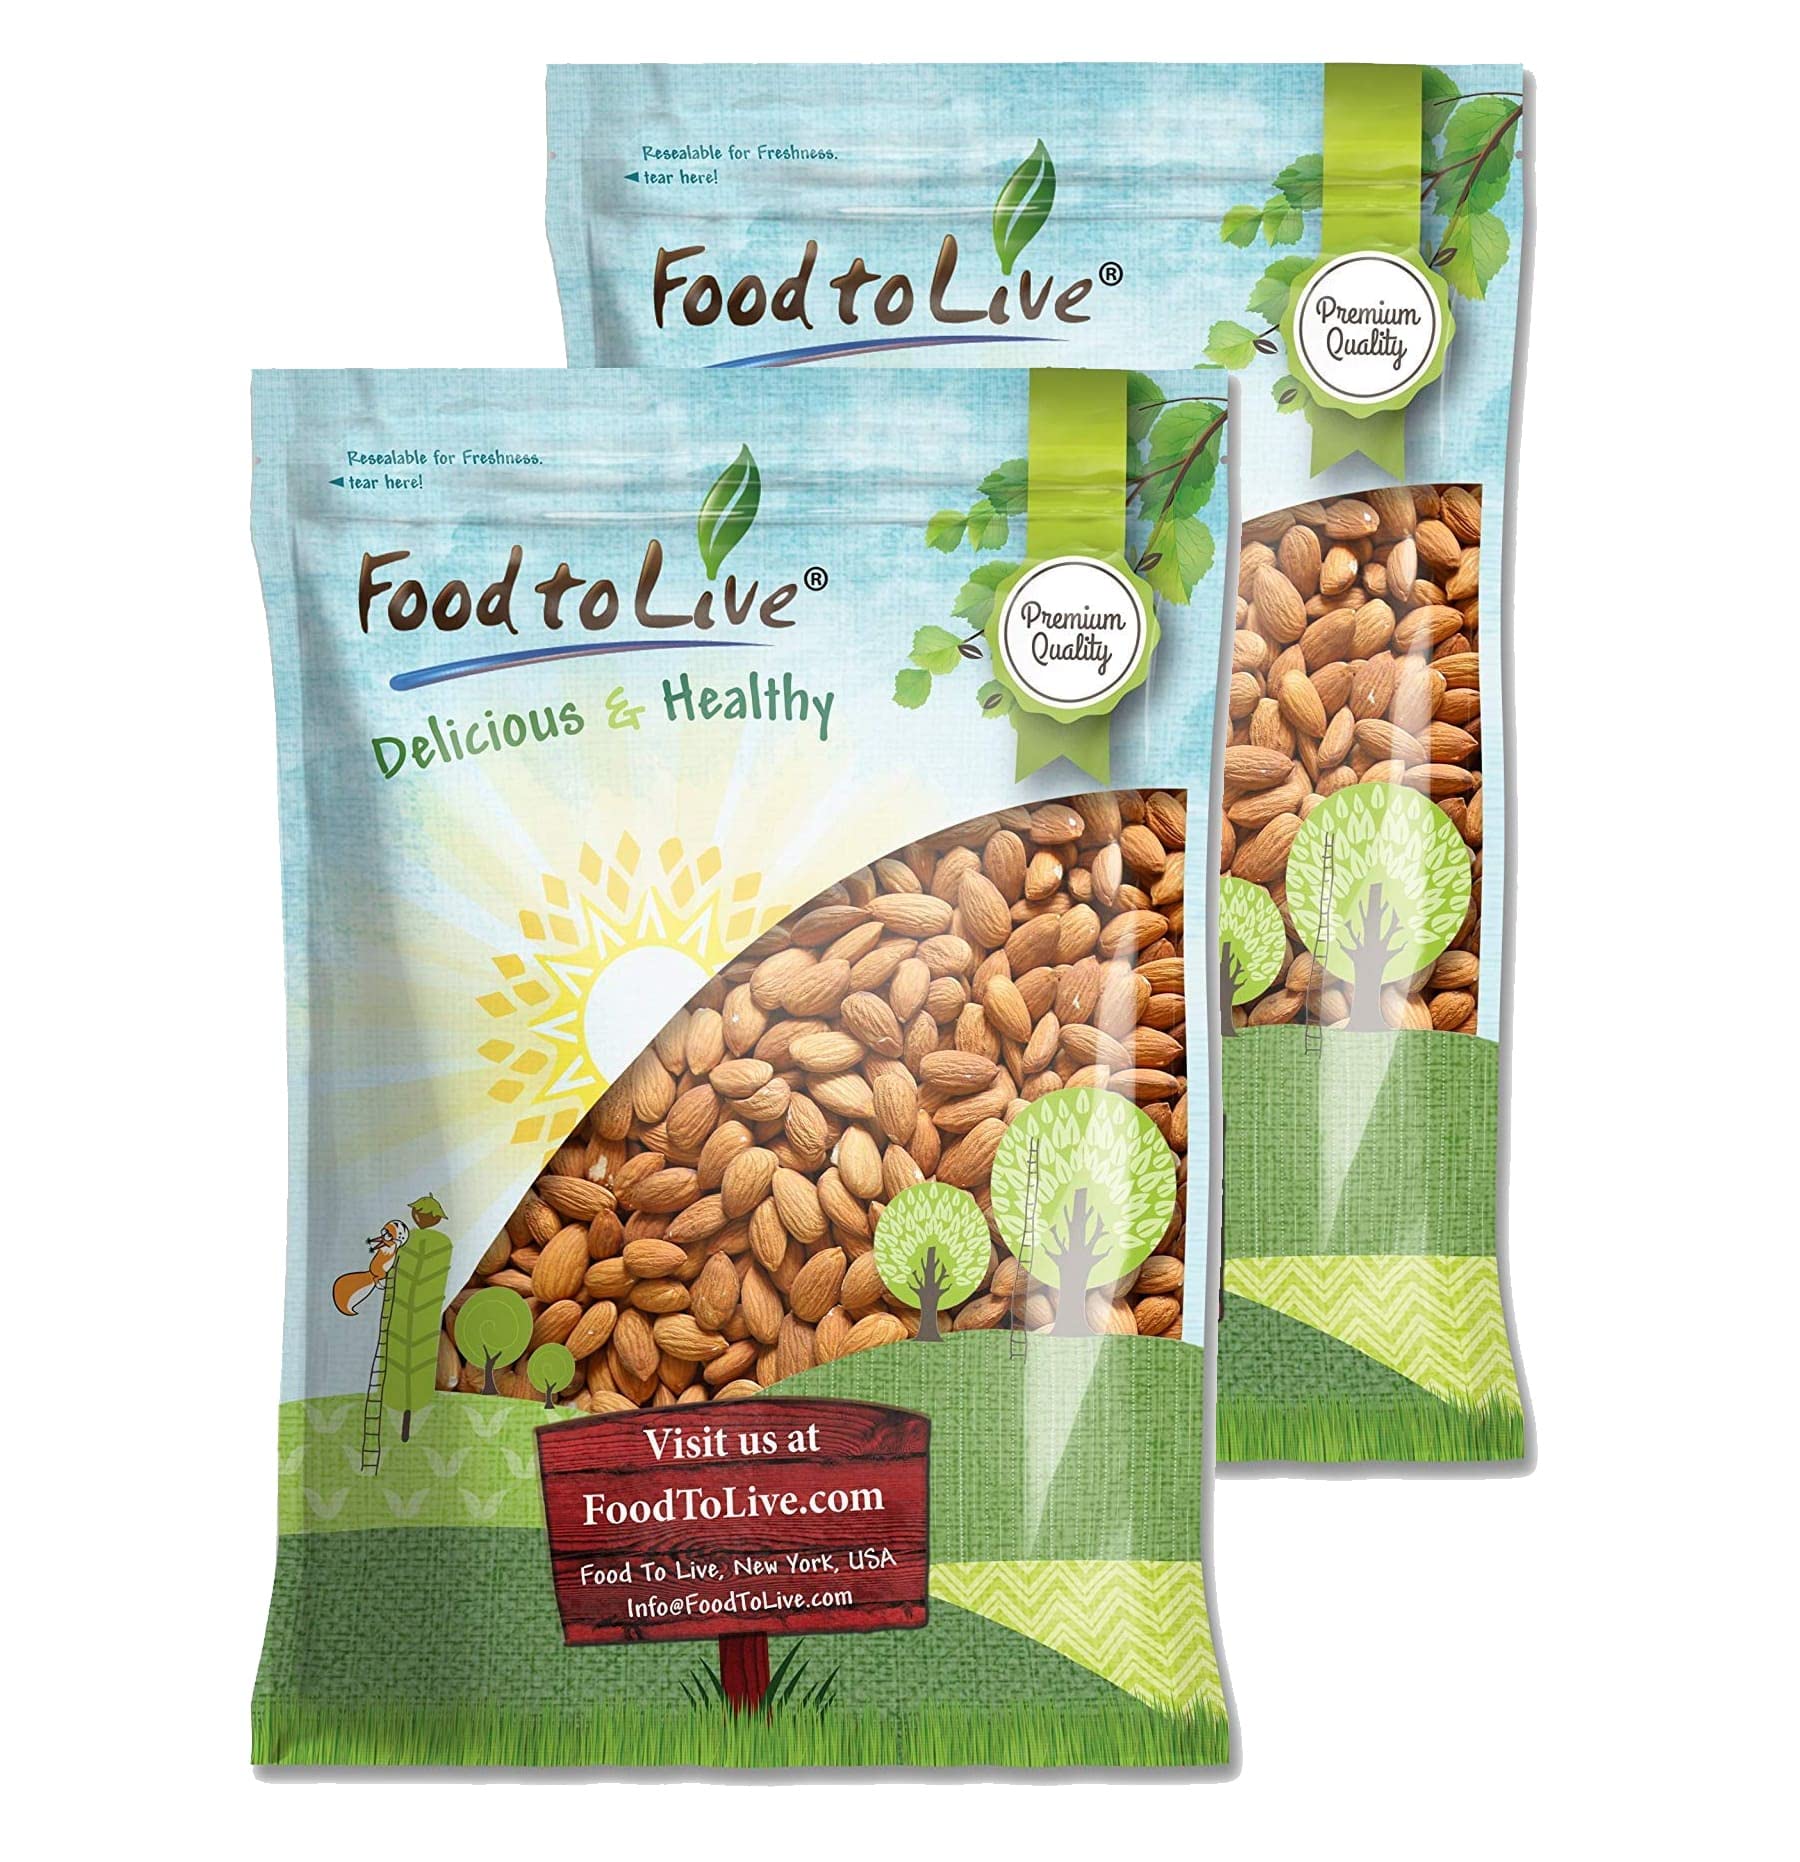 Food to Live california Almonds, 15 Pounds - Supreme, Whole, Raw, Unsalted, Unroasted Nuts, Natural Kosher, Vegan Keto, Paleo, Low Sodium, Bu